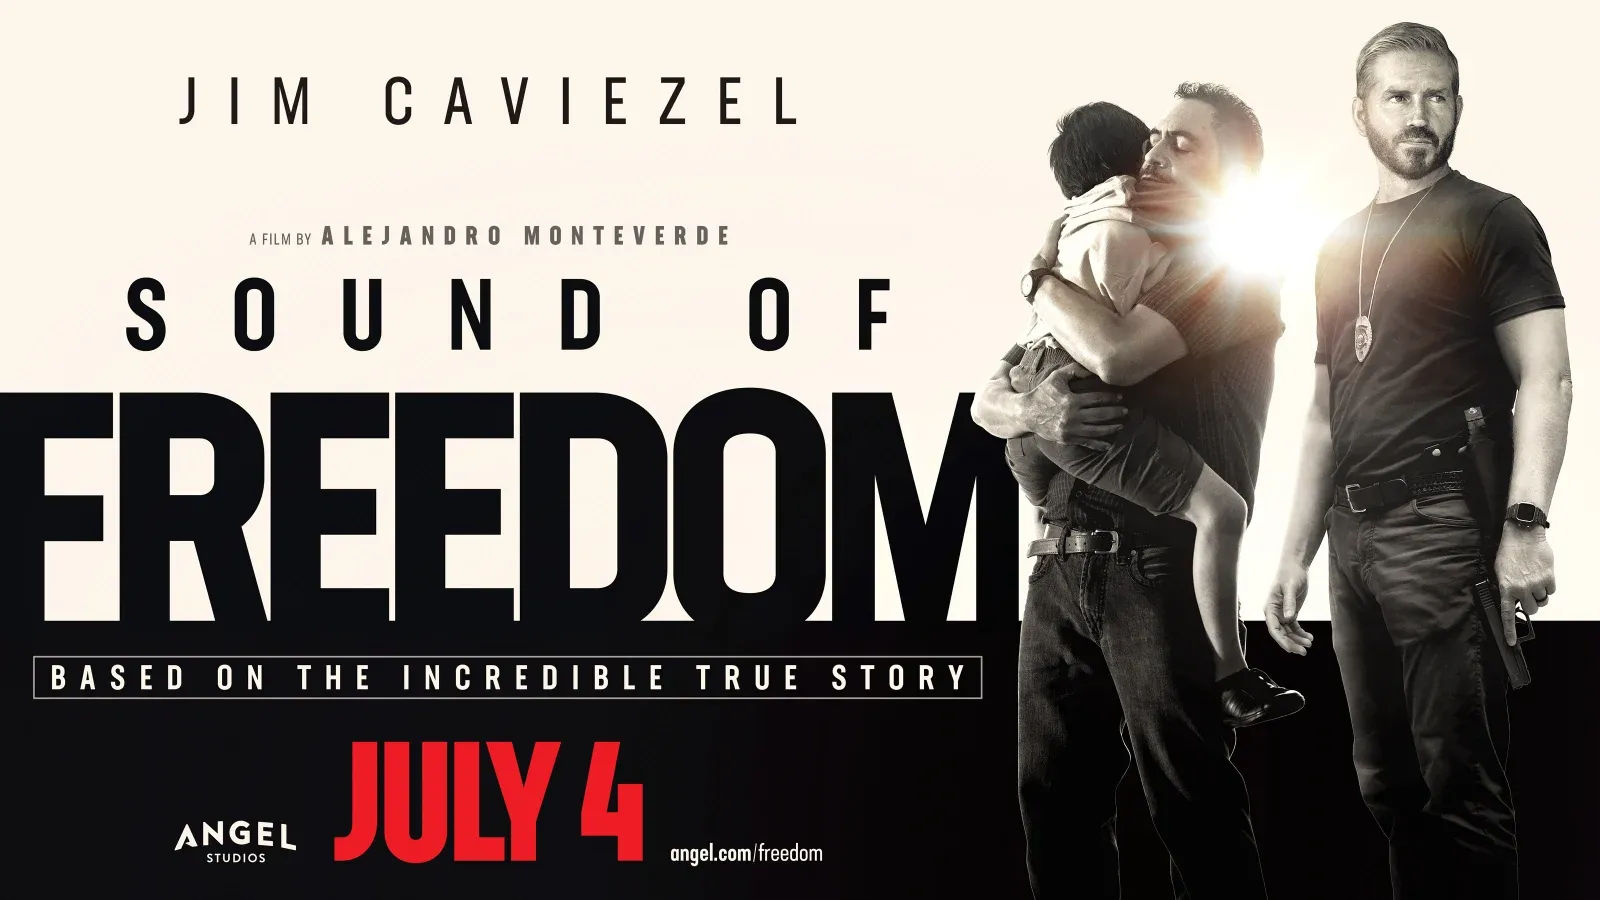 "Sound of Freedom" Anti-Human Trafficking Film Gets $7m in Pre-Sales for July 4 Independence Day Release